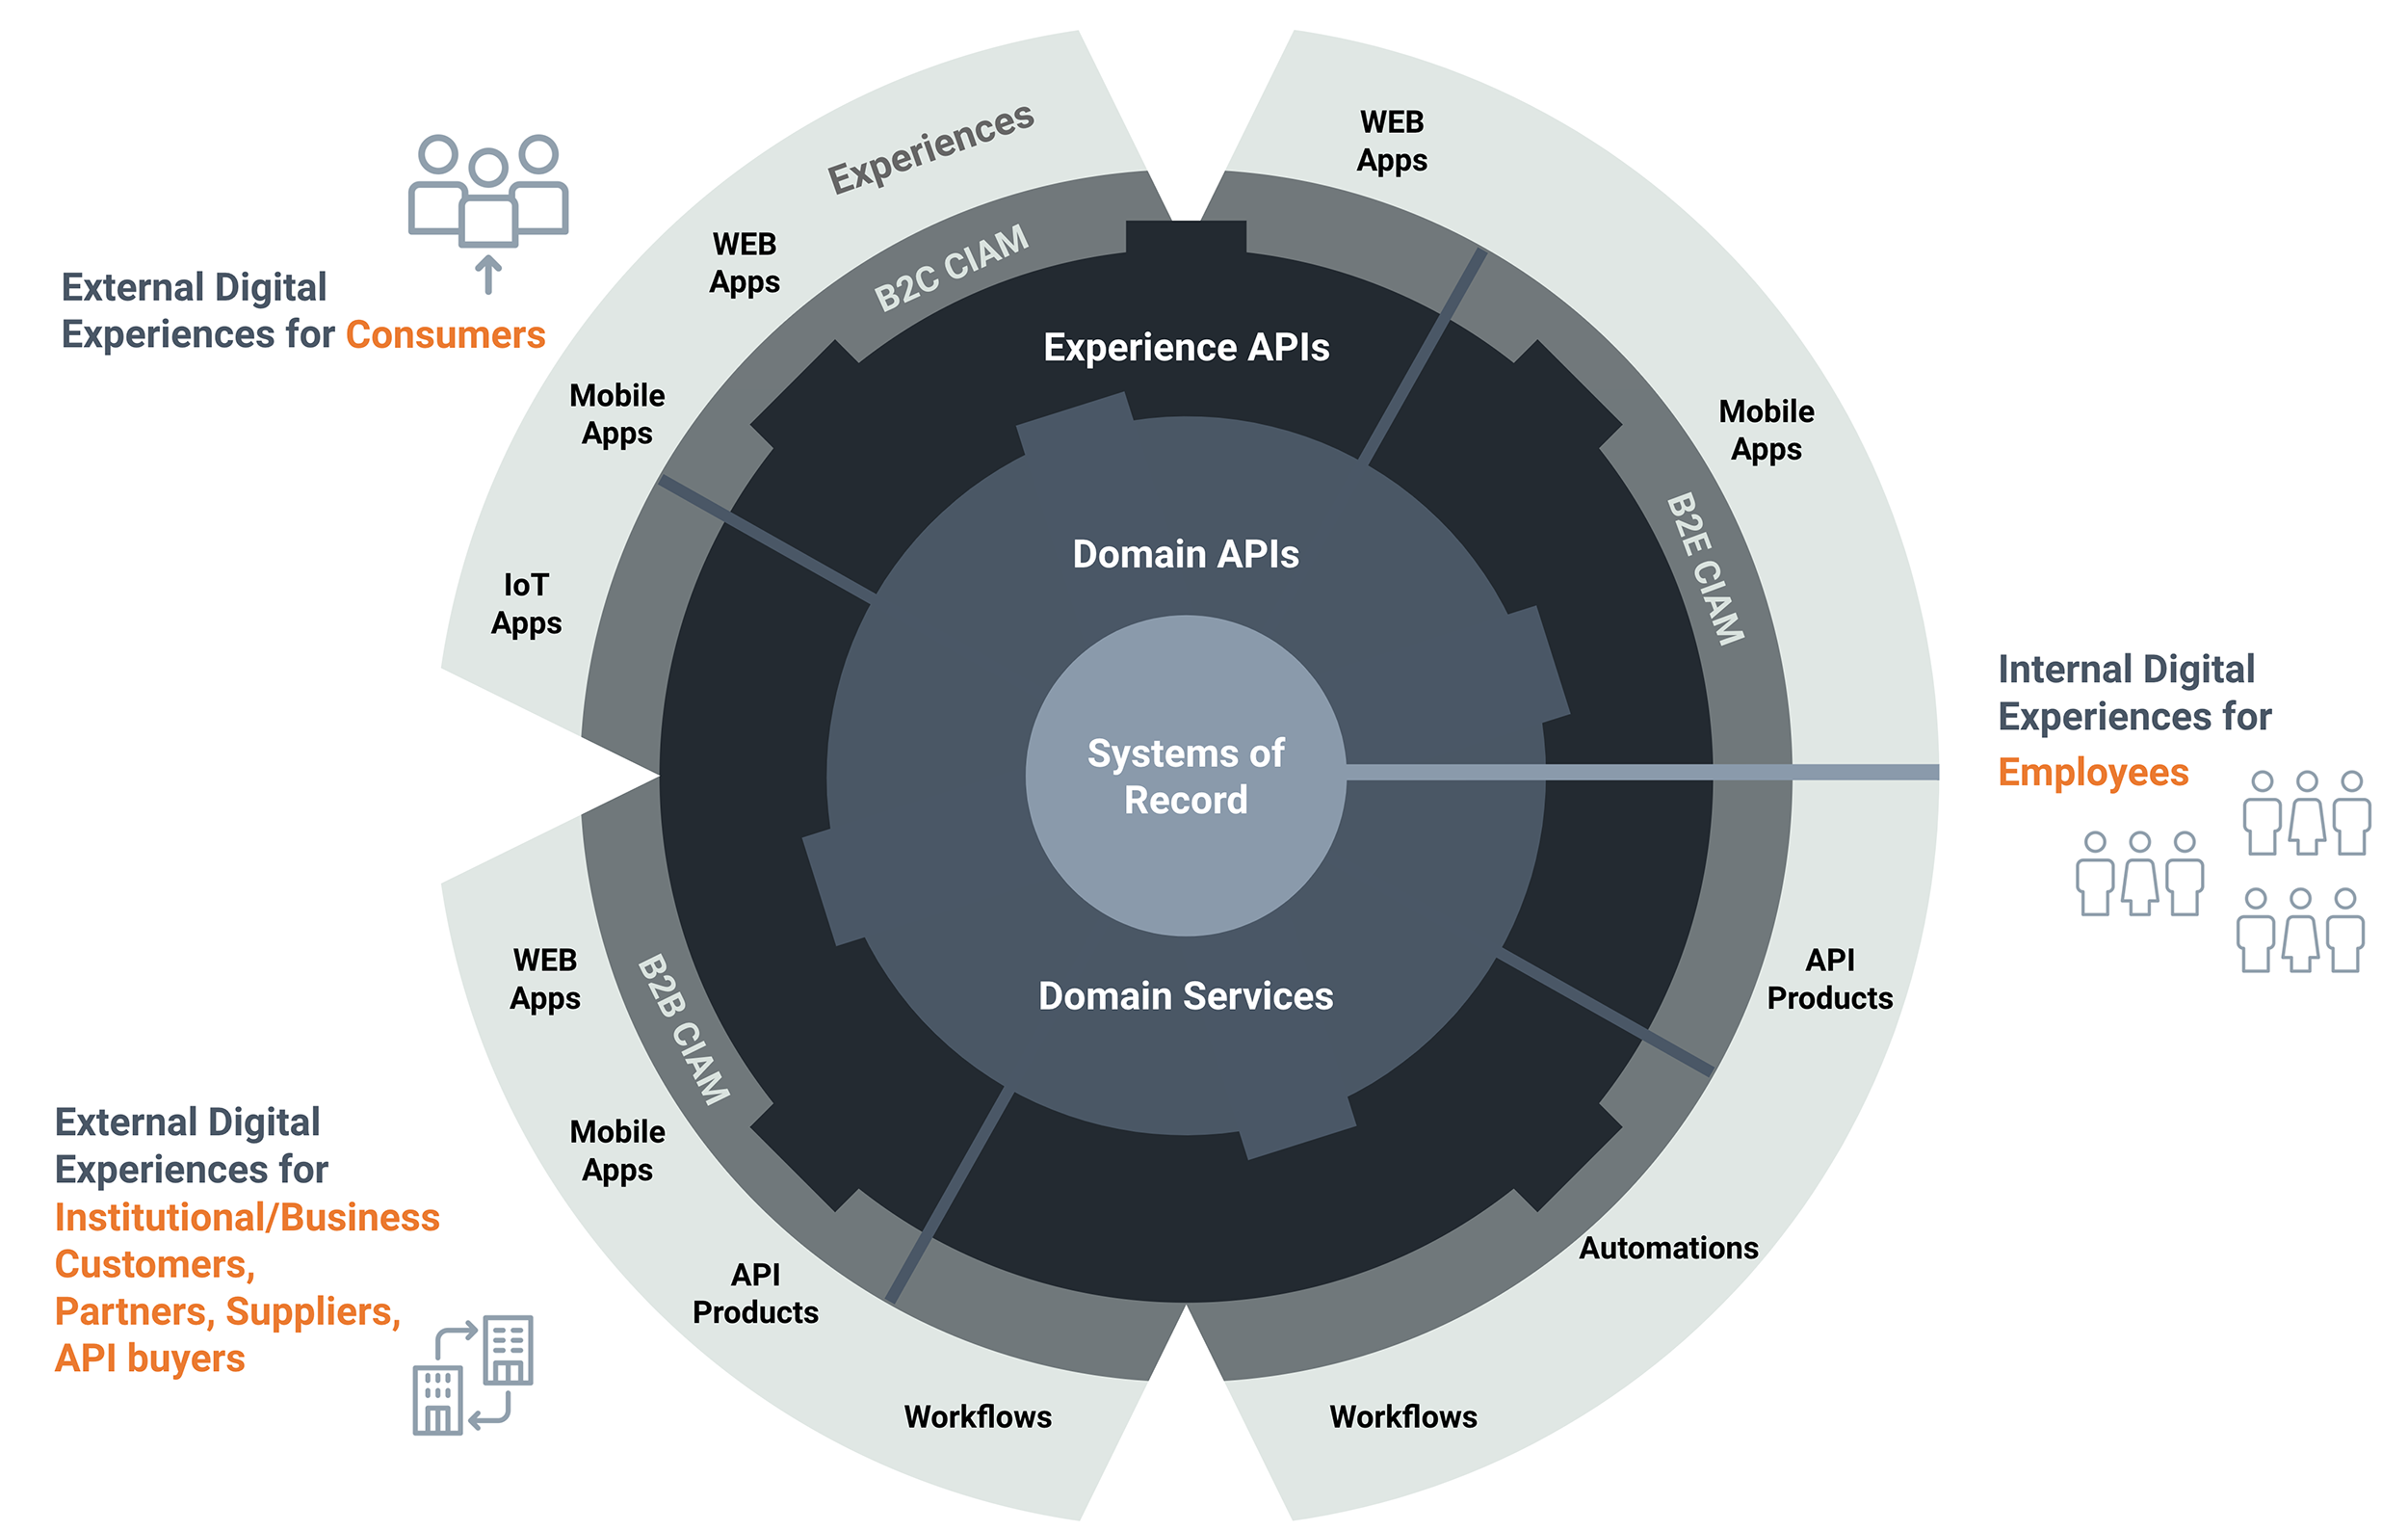 Your Business, as APIs